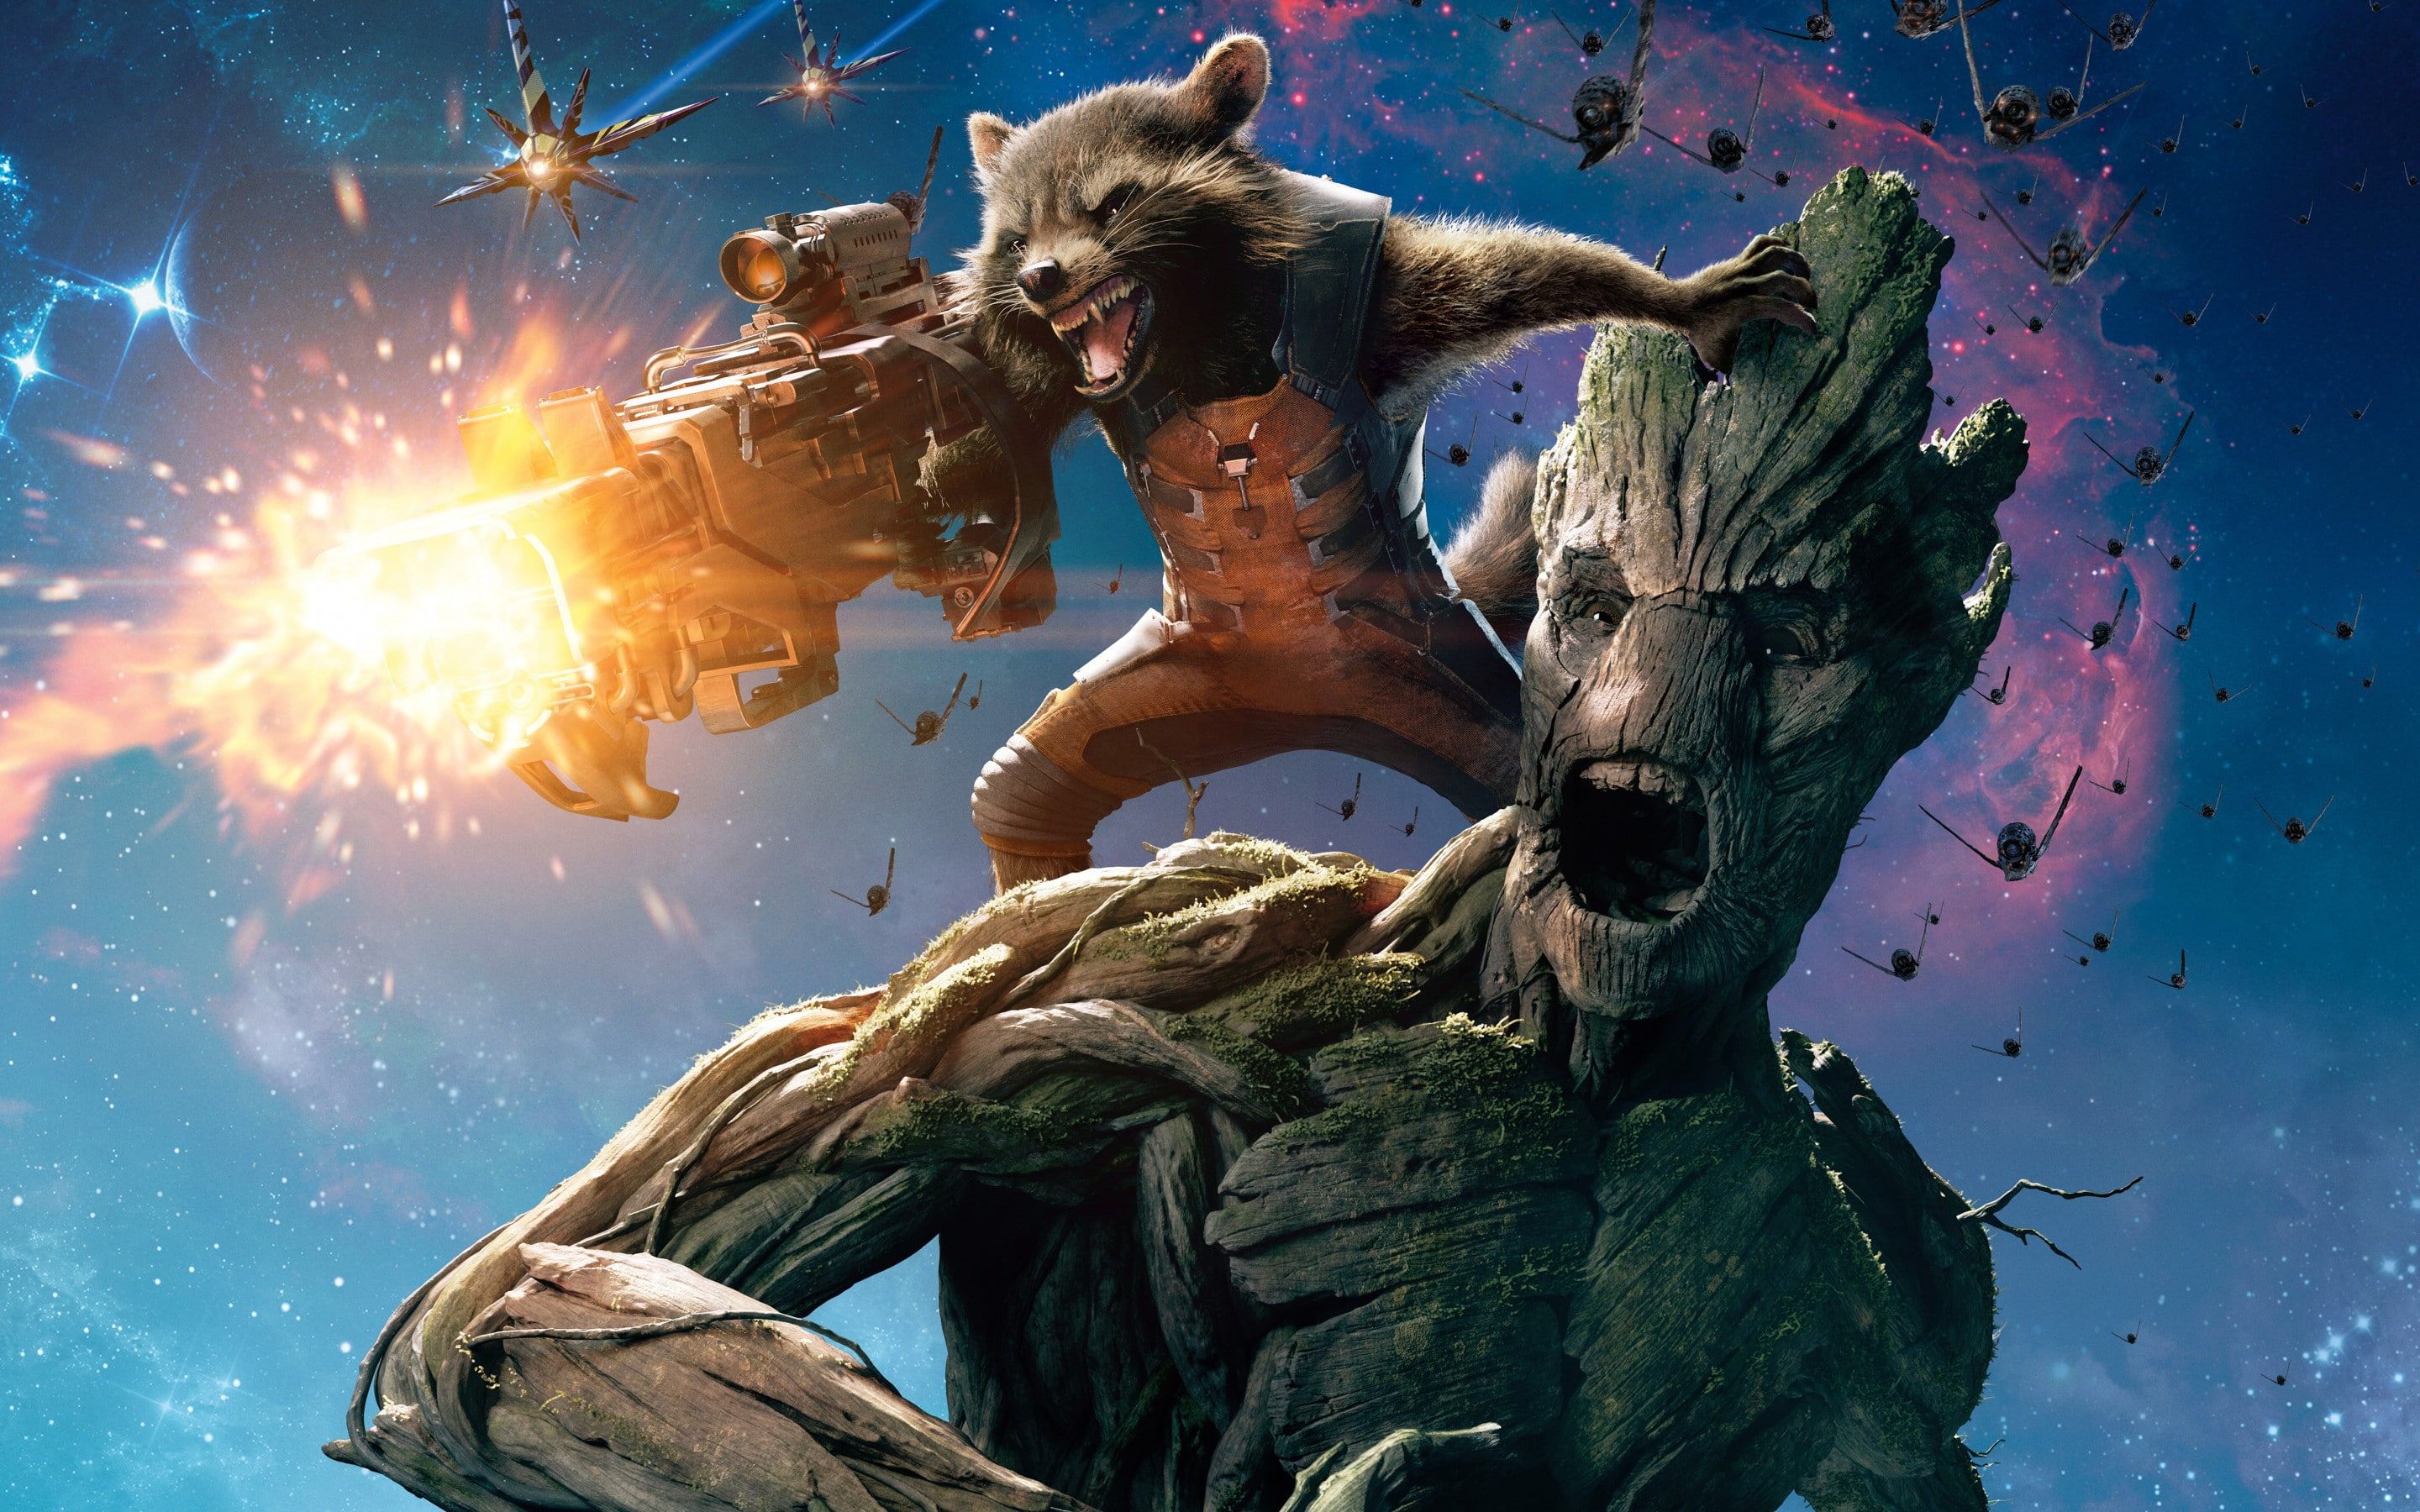 Guardians of the Galaxy, Movie, Film, ratchet and groot Guardians of the Galaxy #Movie #Film #Groot #Rocket #Racc. Guardians of the galaxy, Rocket raccoon, Marvel